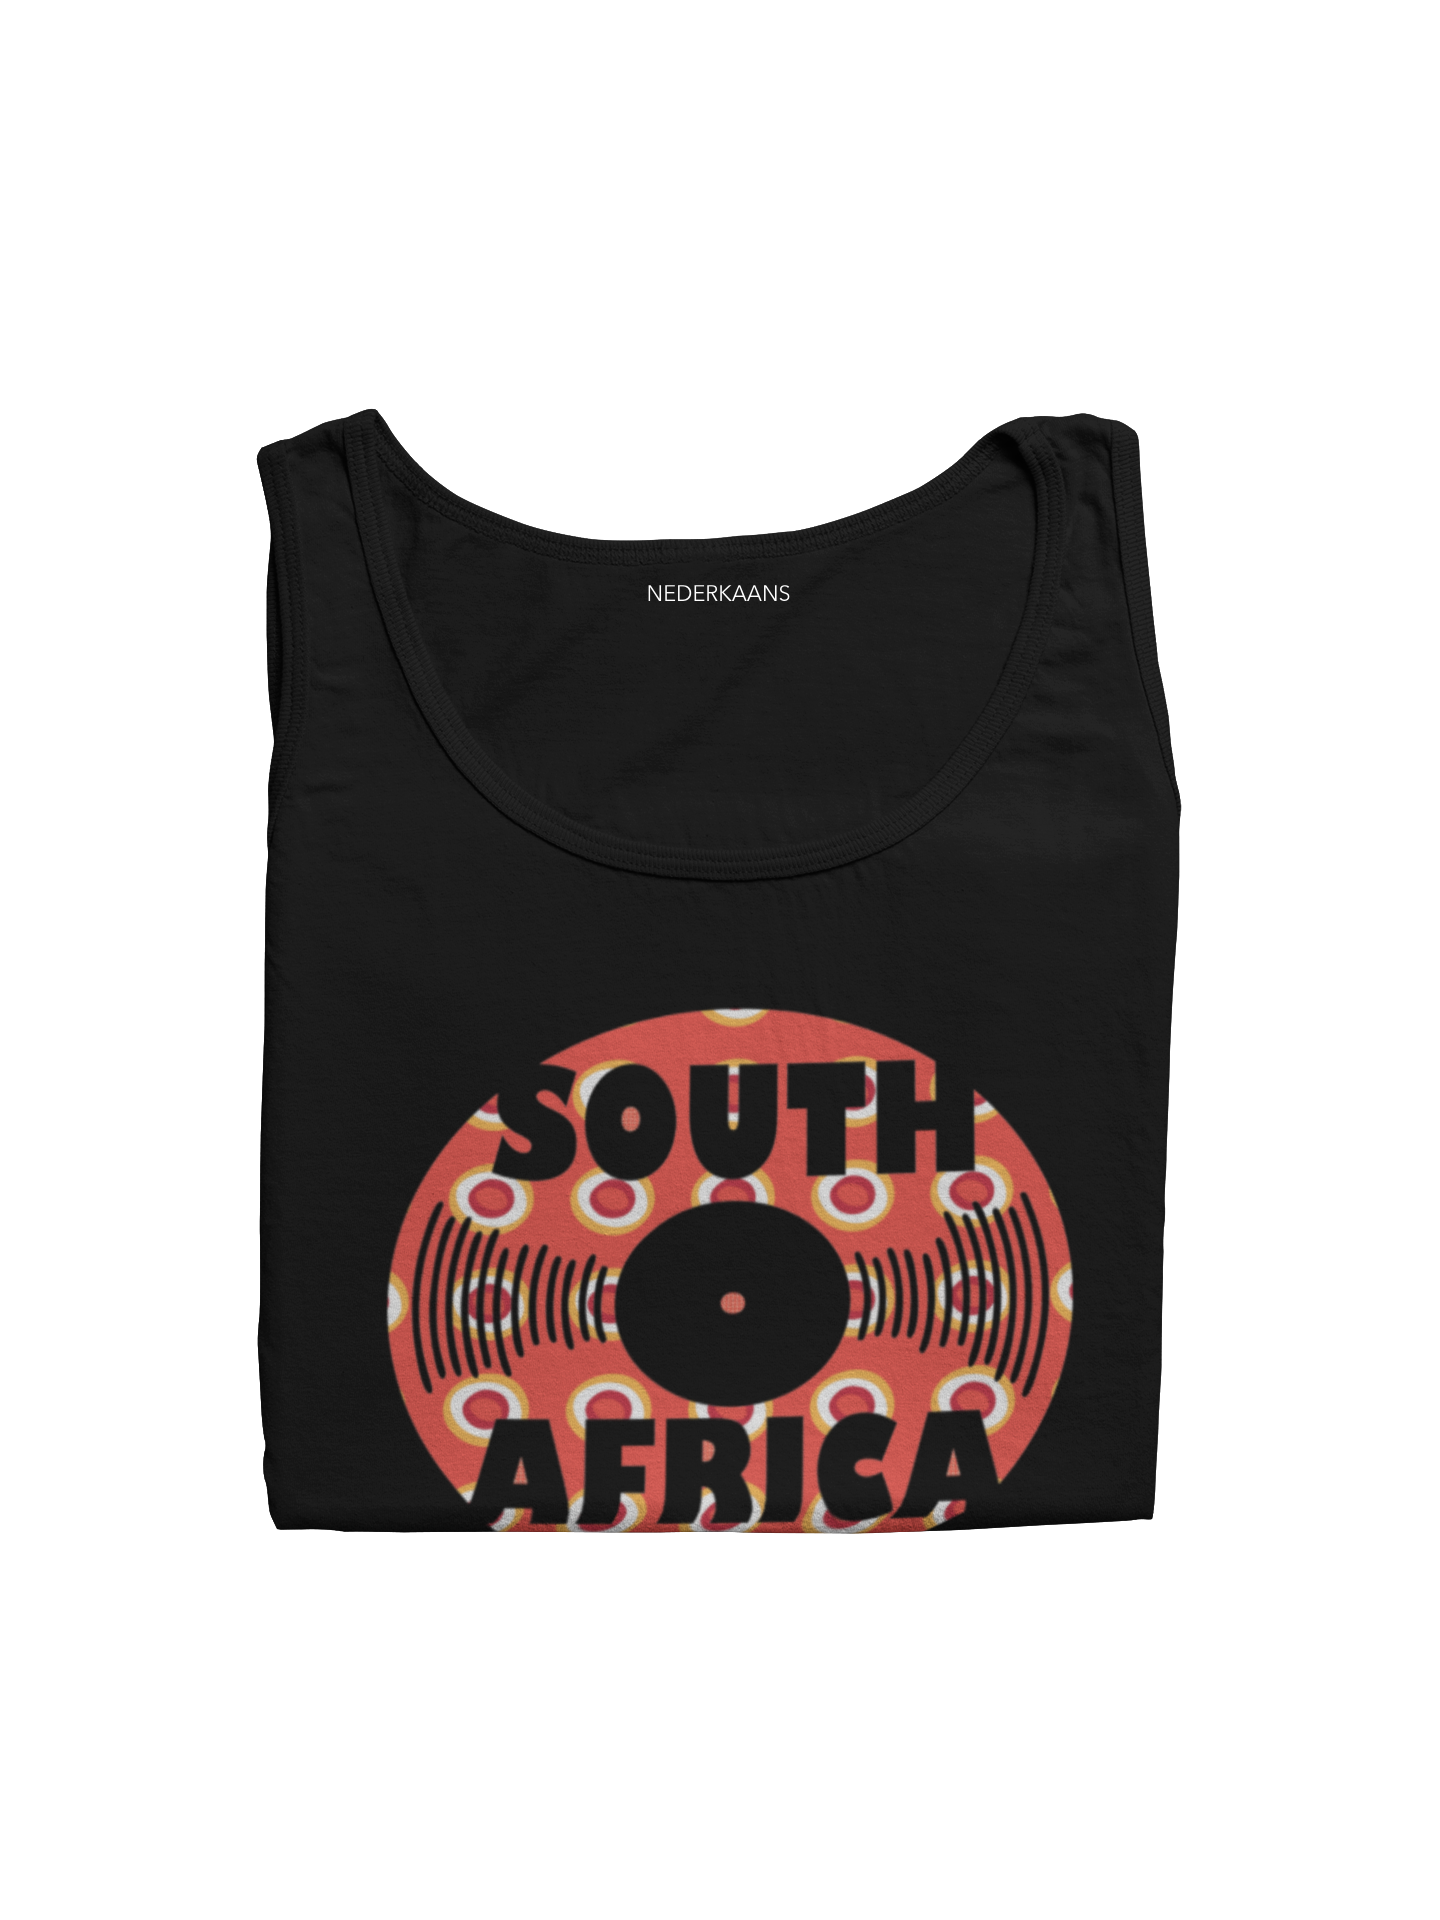 South African Record Tank Top - Ladies Shirt